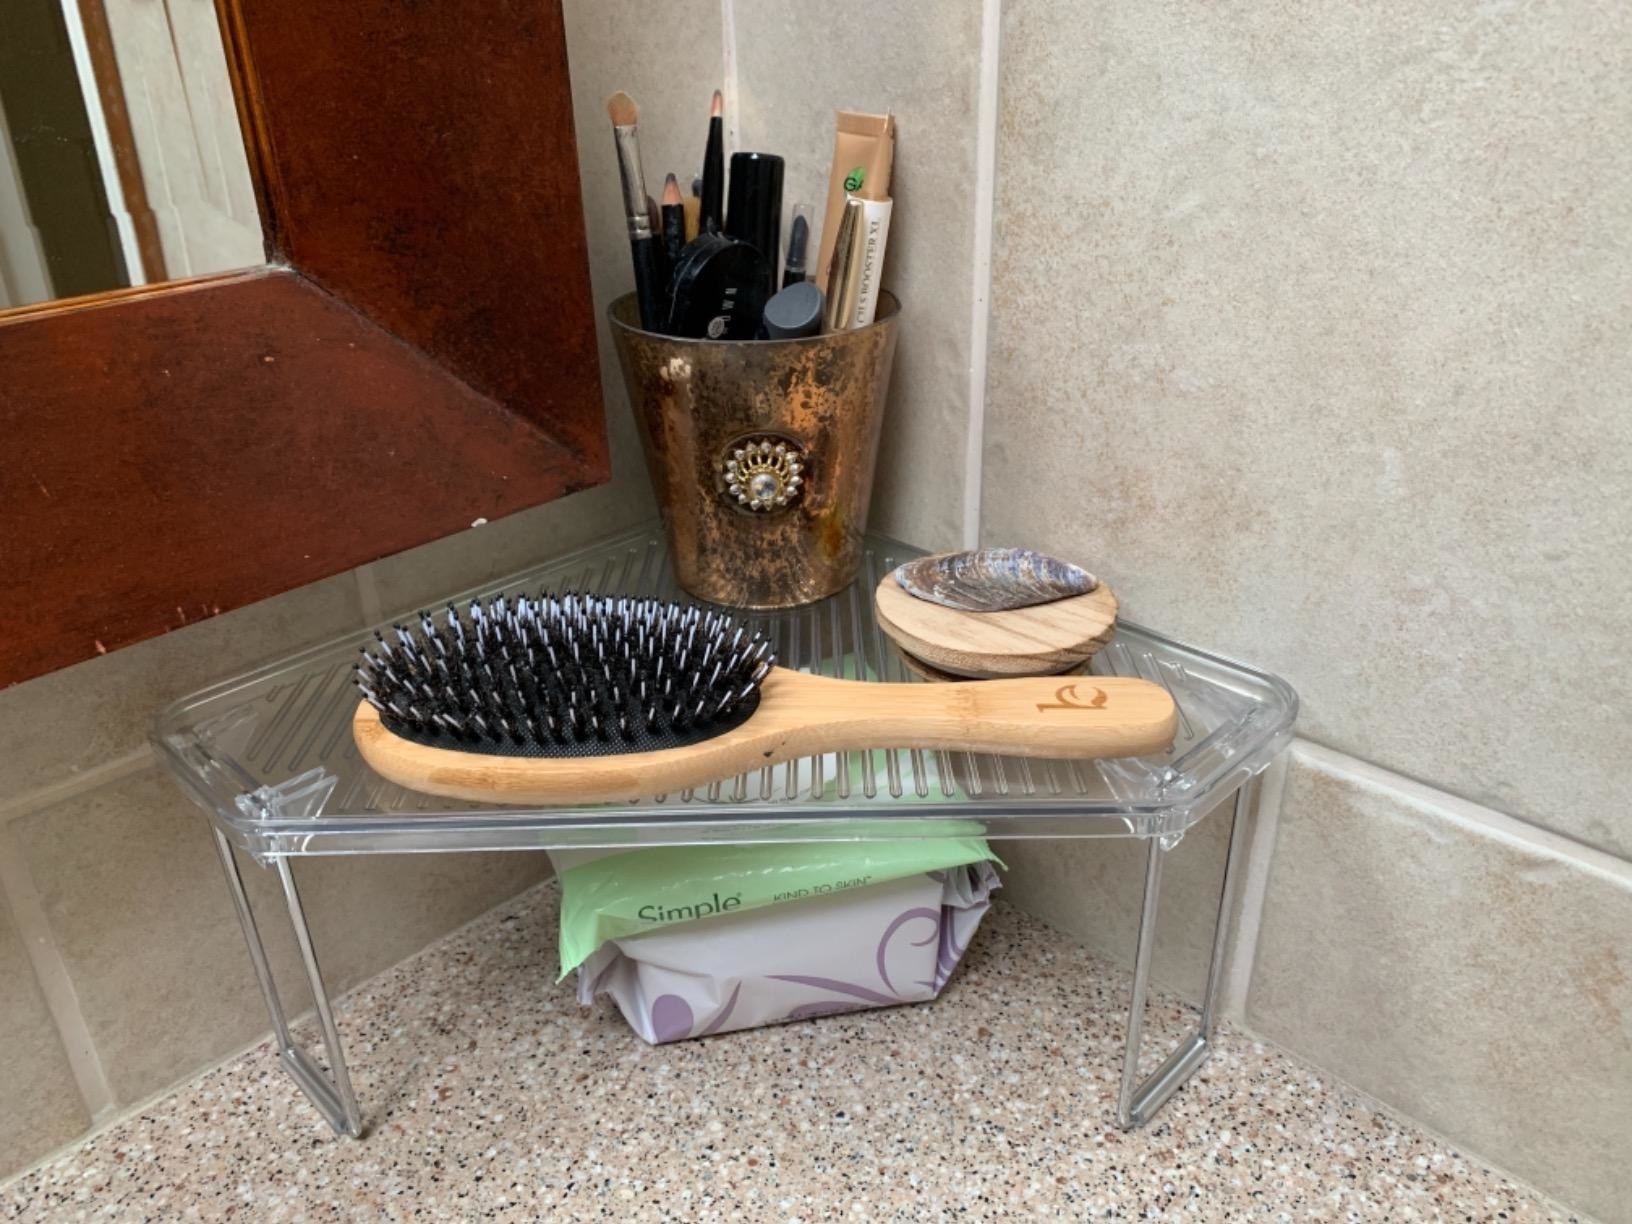 Reviewer photo of the clear shelf holding a hair brush and some makeup brushes